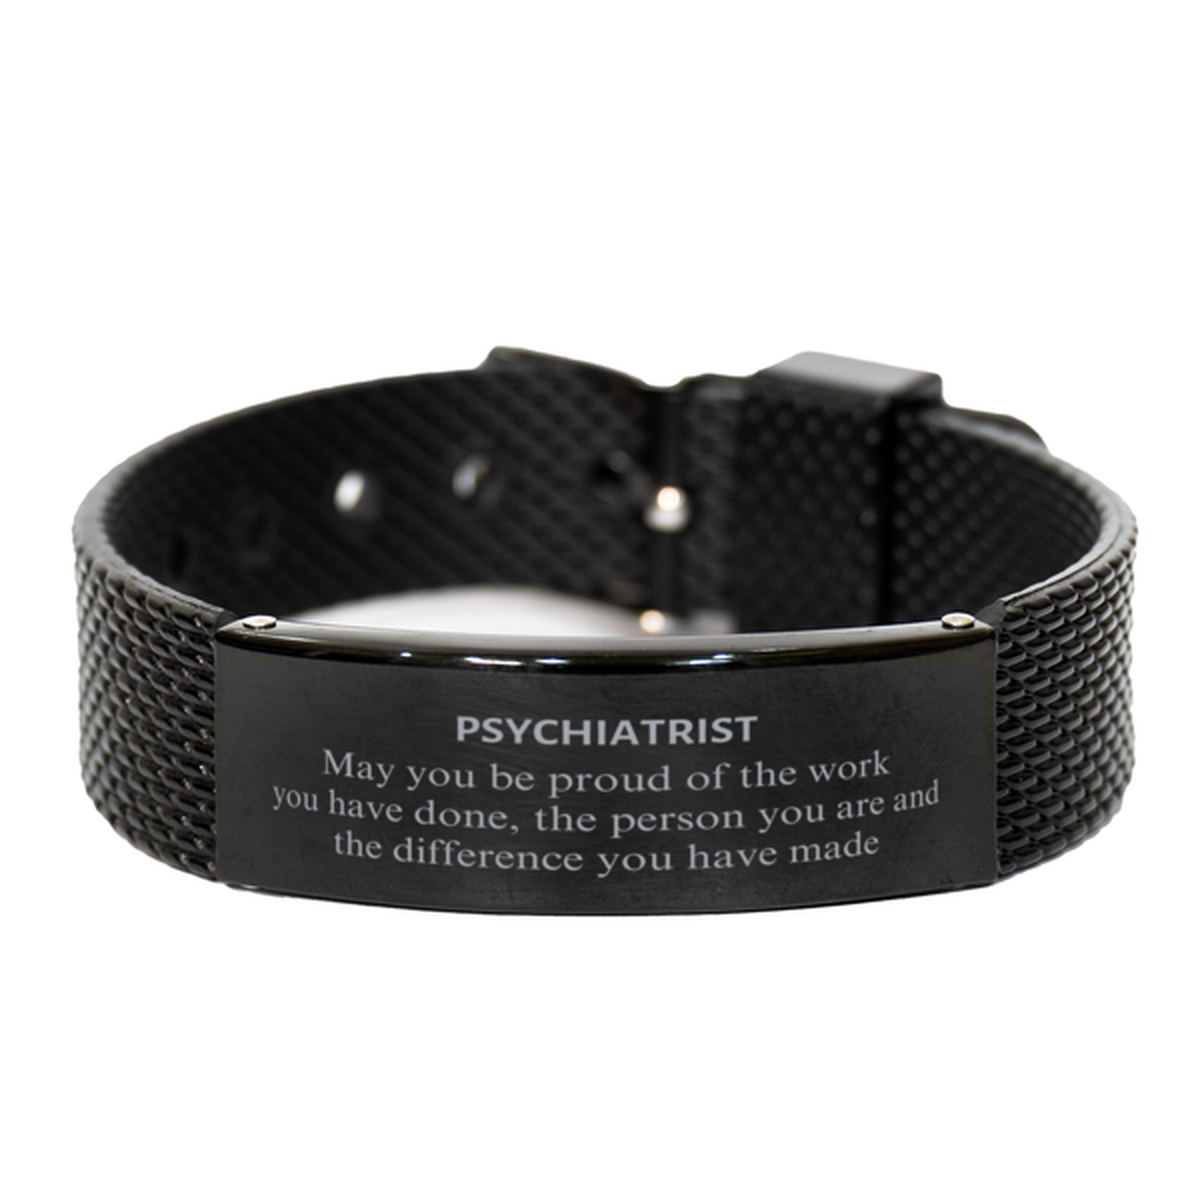 Psychiatrist May you be proud of the work you have done, Retirement Psychiatrist Black Shark Mesh Bracelet for Colleague Appreciation Gifts Amazing for Psychiatrist